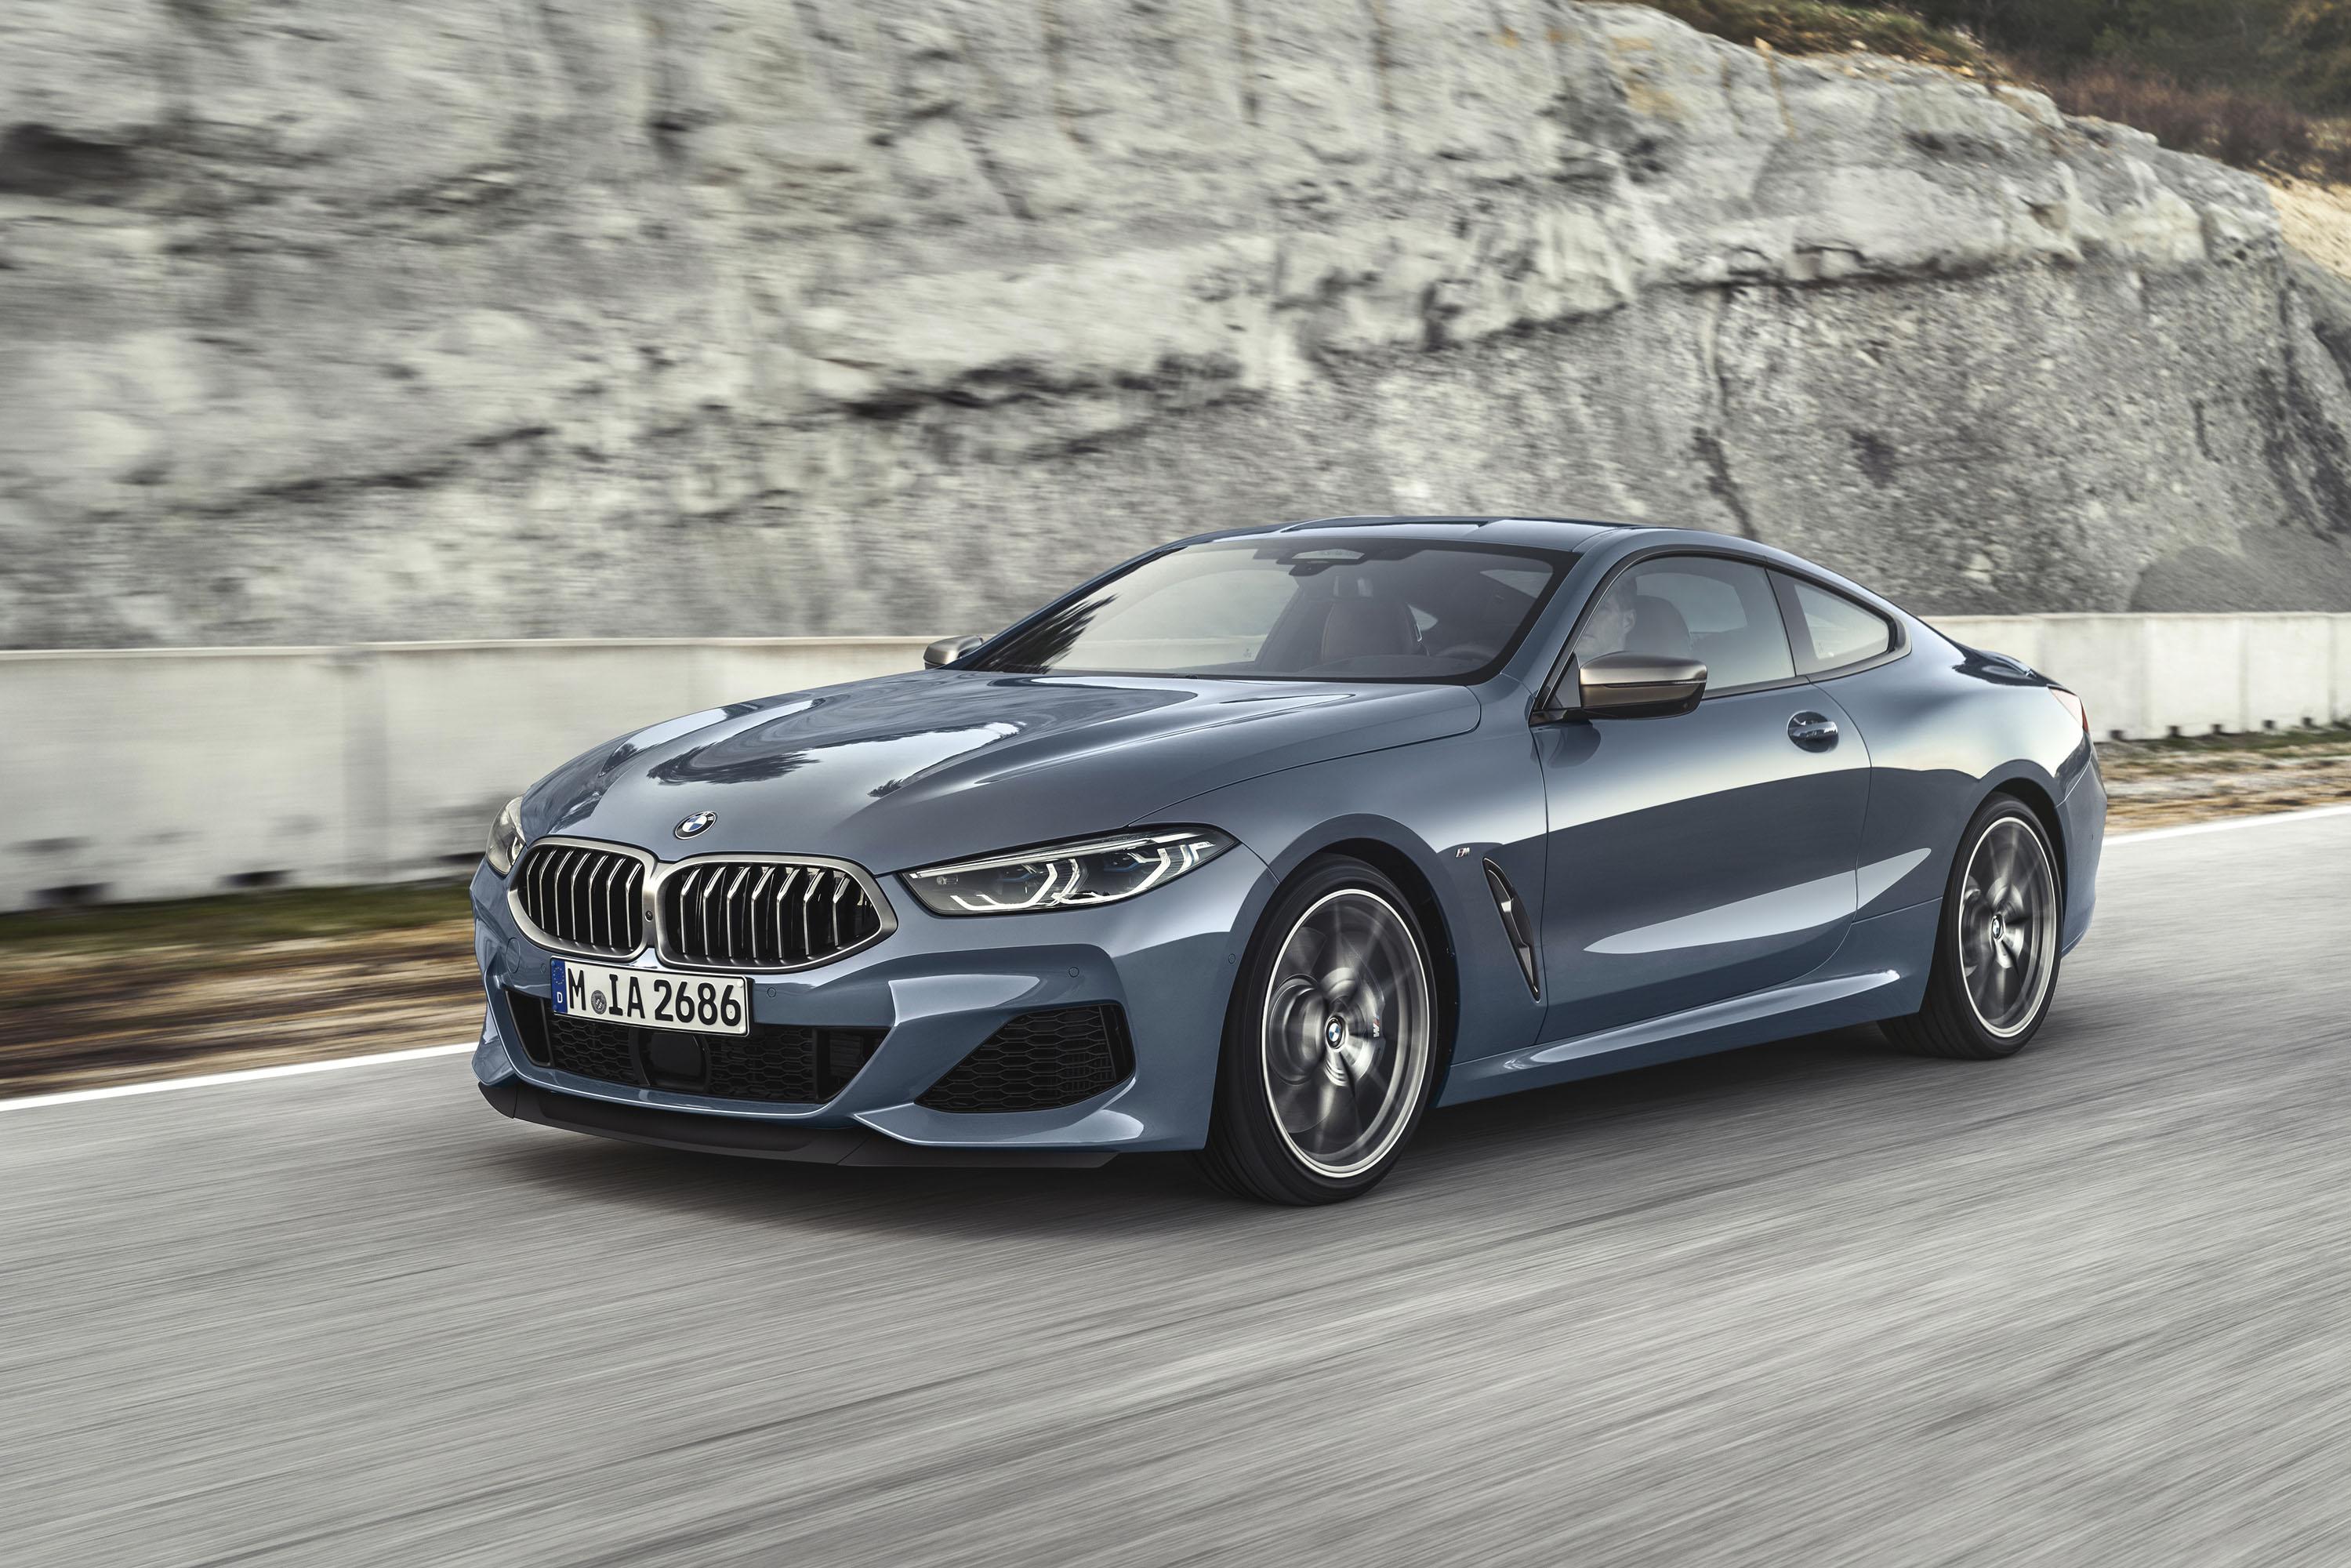 BMW M850i priced from $ arrives in December